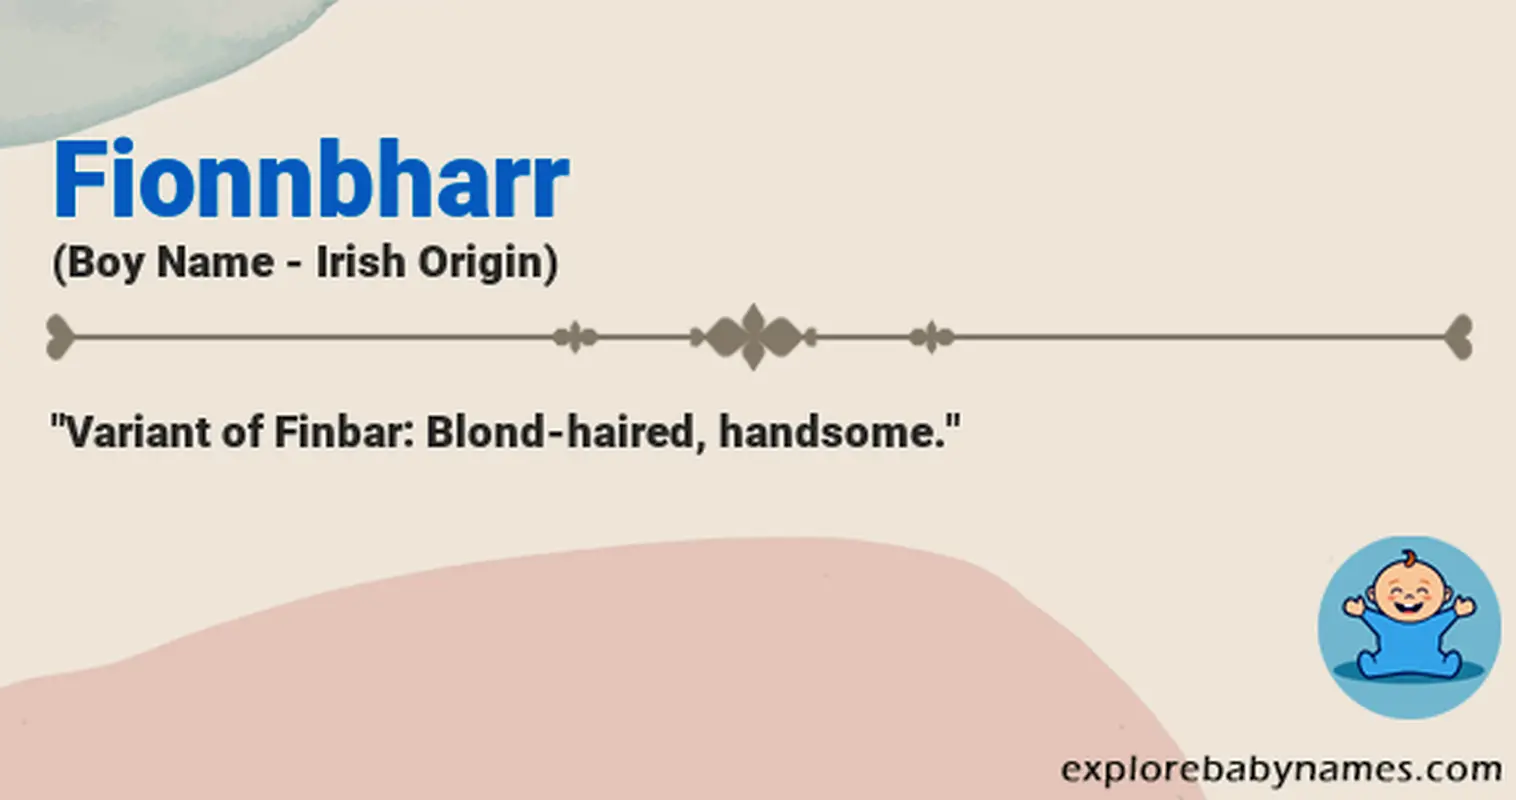 Meaning of Fionnbharr